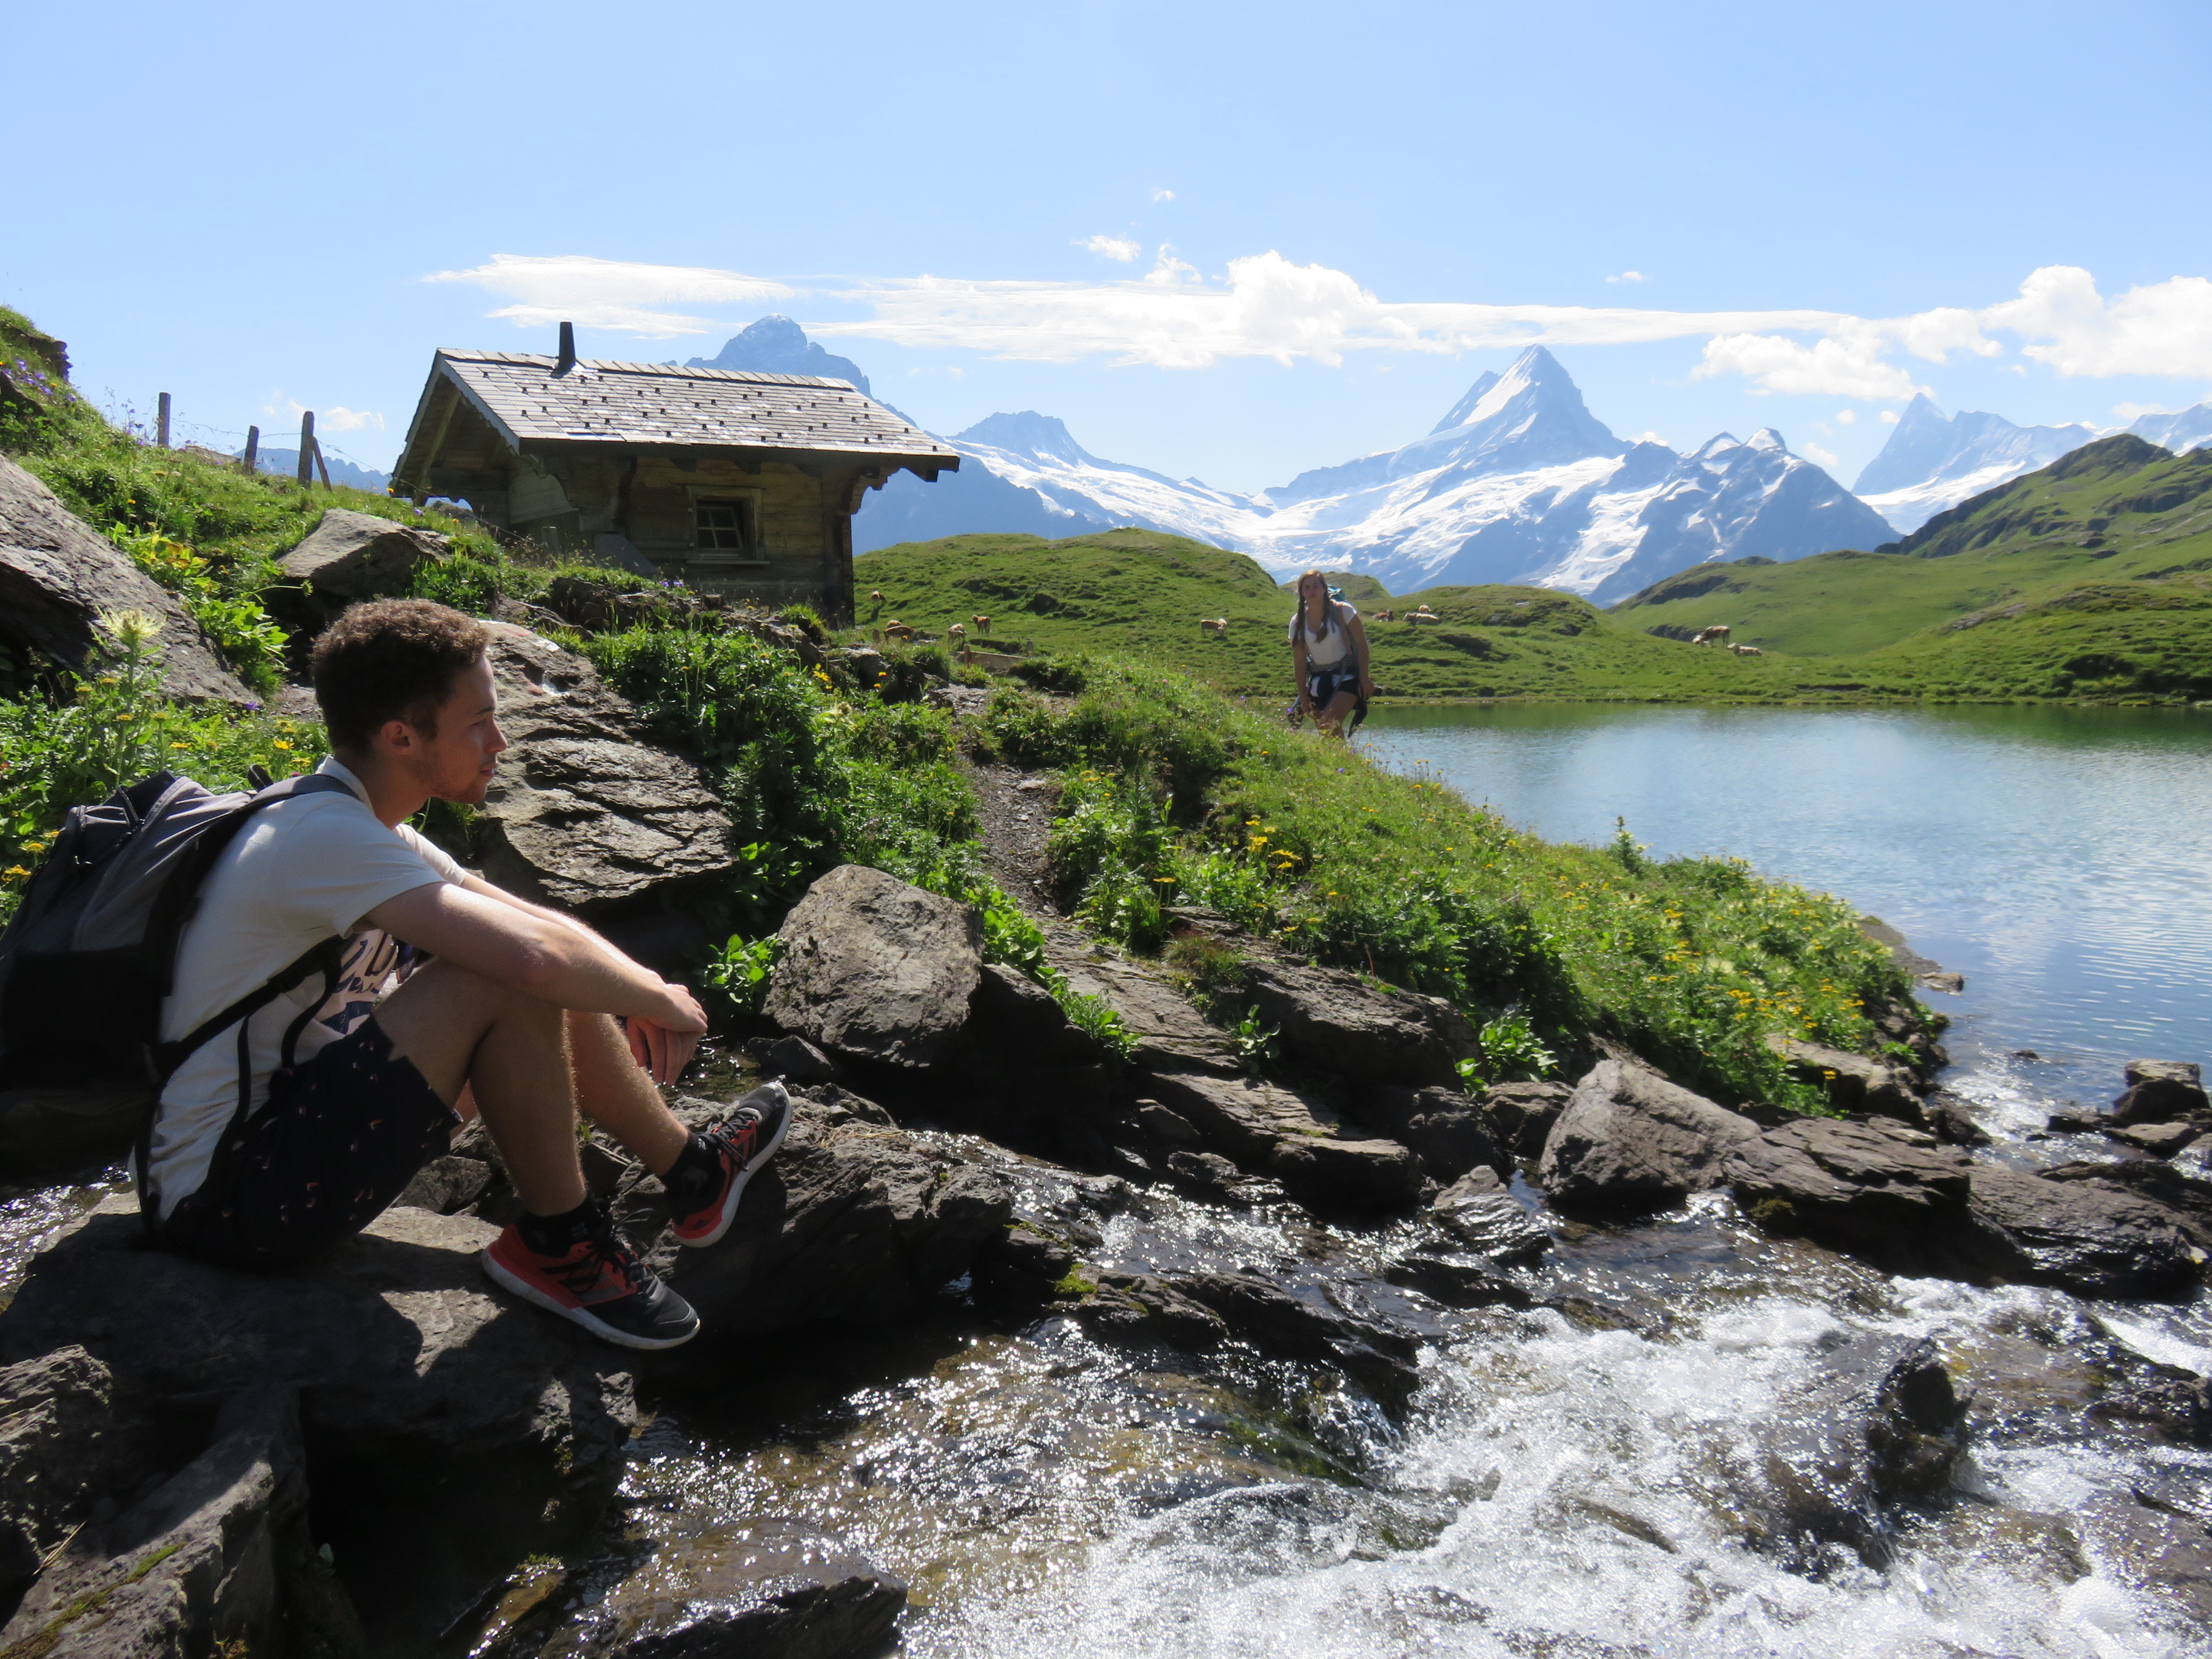 Matthew sitting next to a lake, with the mountains in the background in Switzerland.